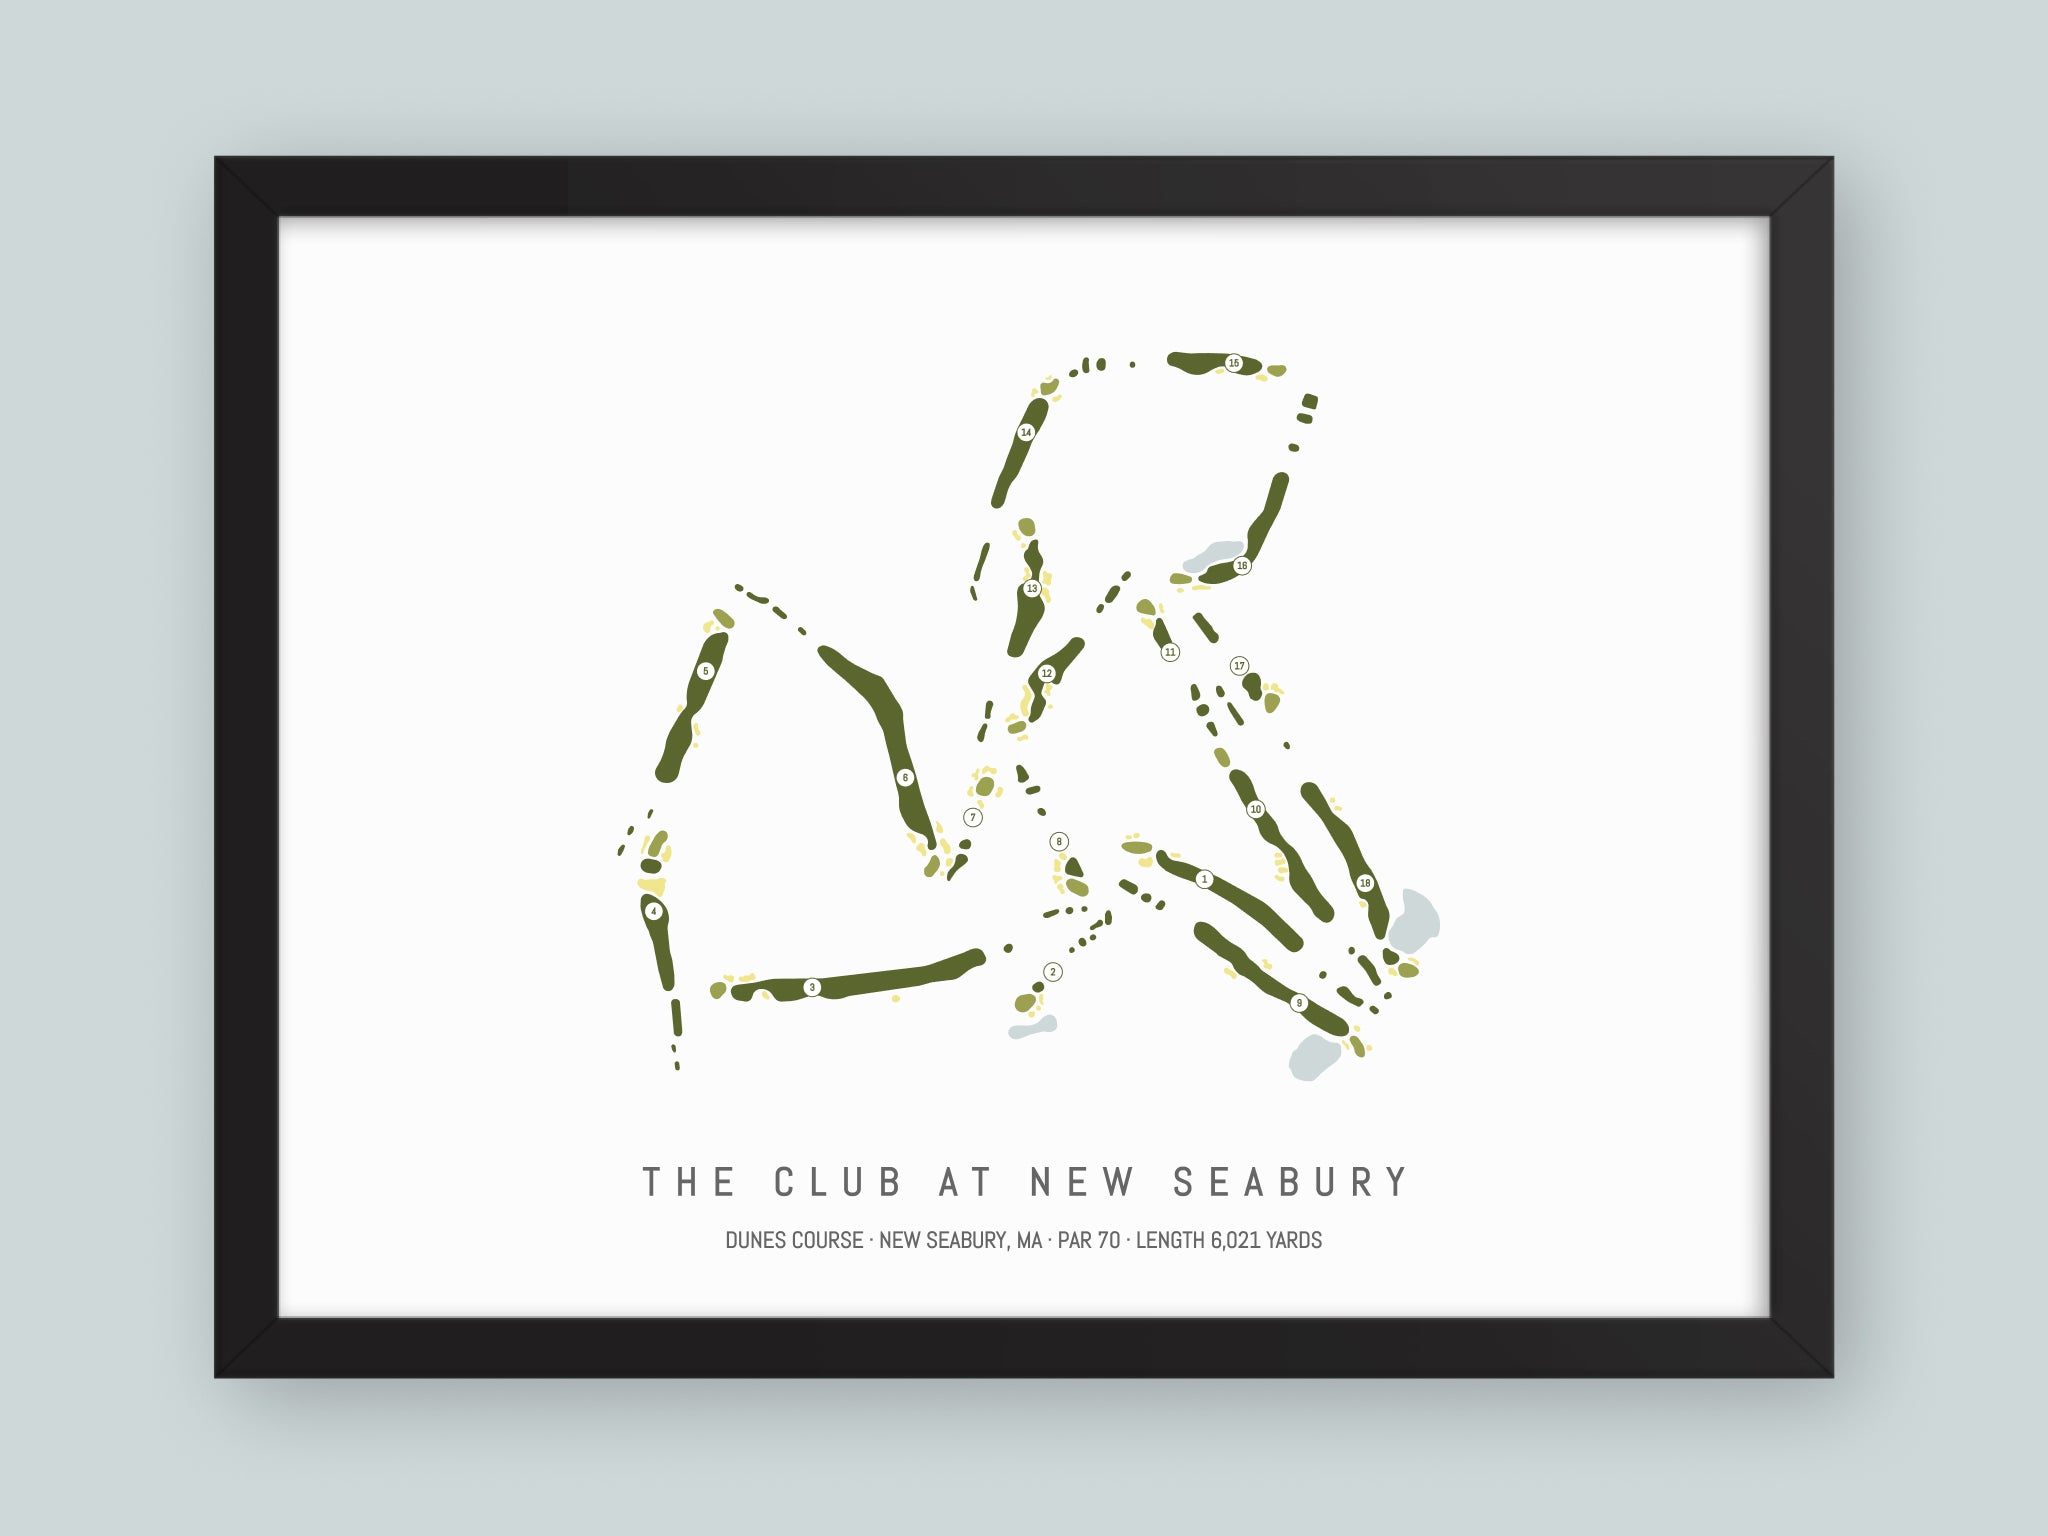 The-Club-at-New-Seabury-Dunes-Course-MA--Black-Frame-24x18-With-Hole-Numbers